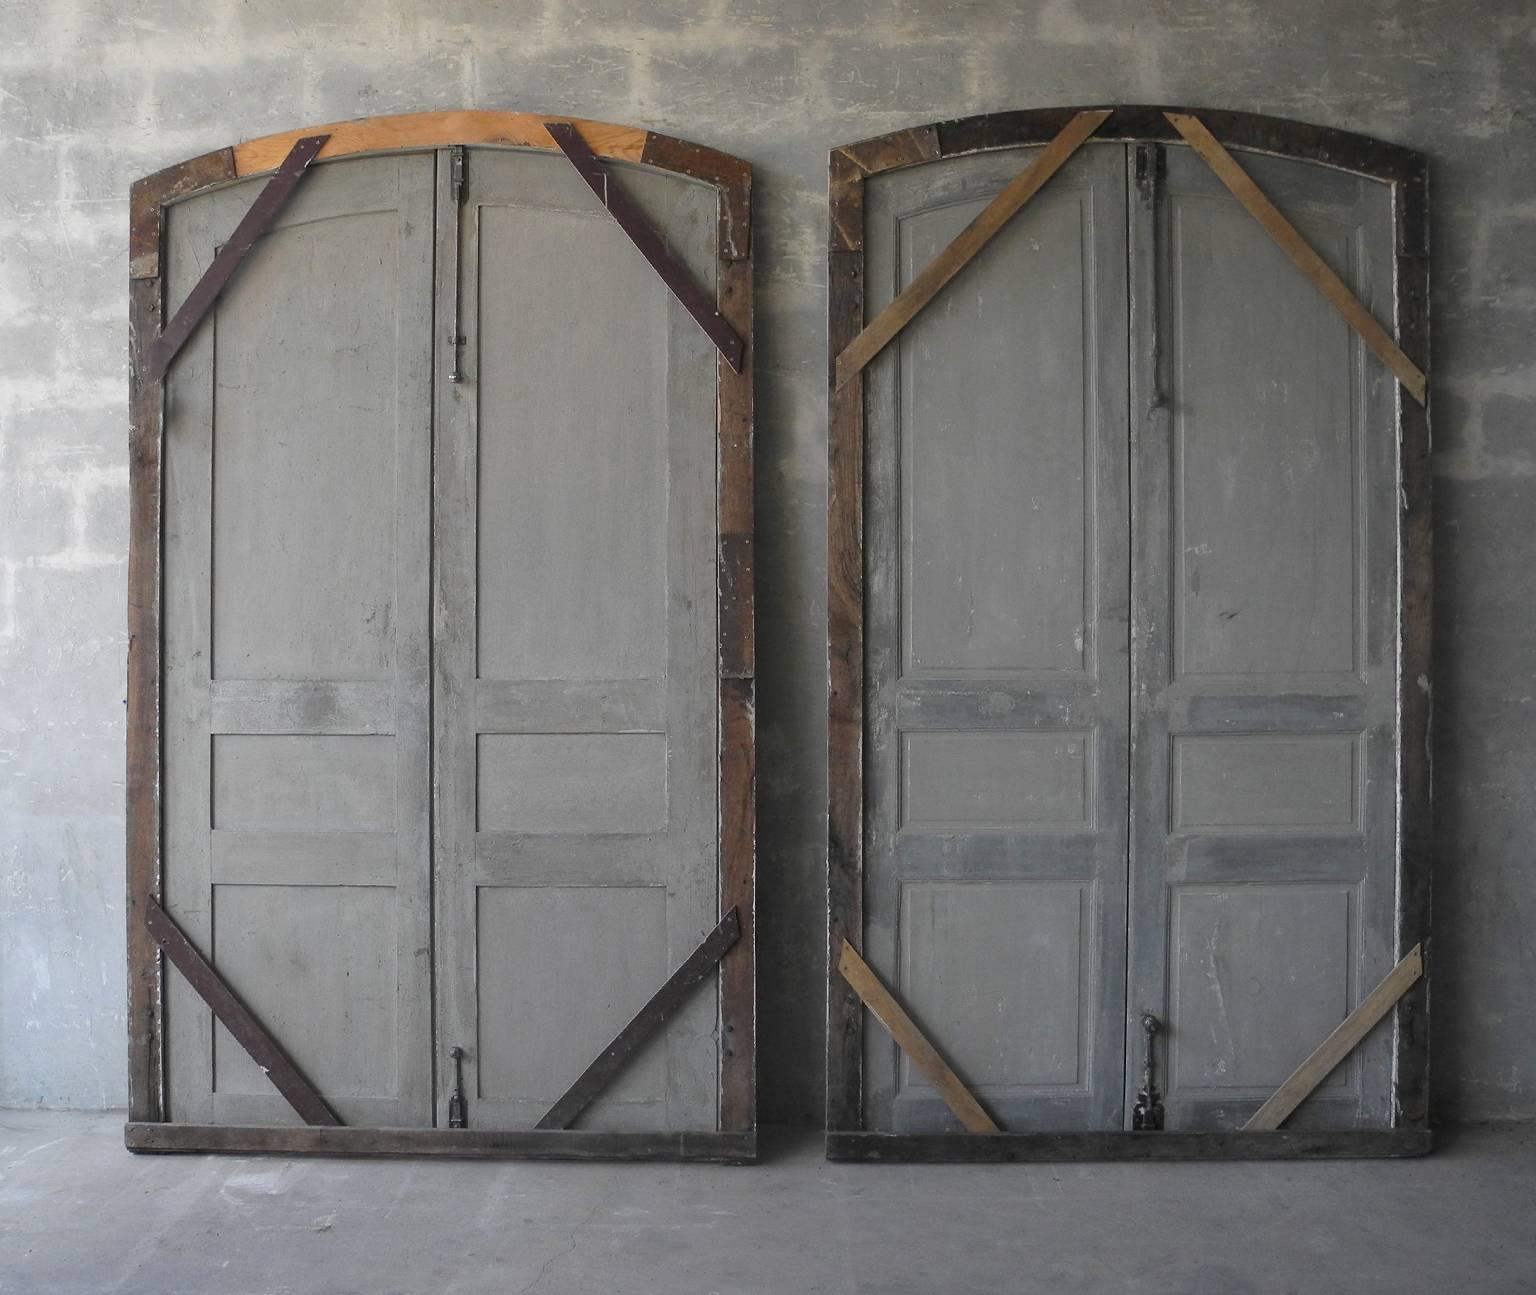 This is a statement set of two pairs of antique, 18th c. doors from a 